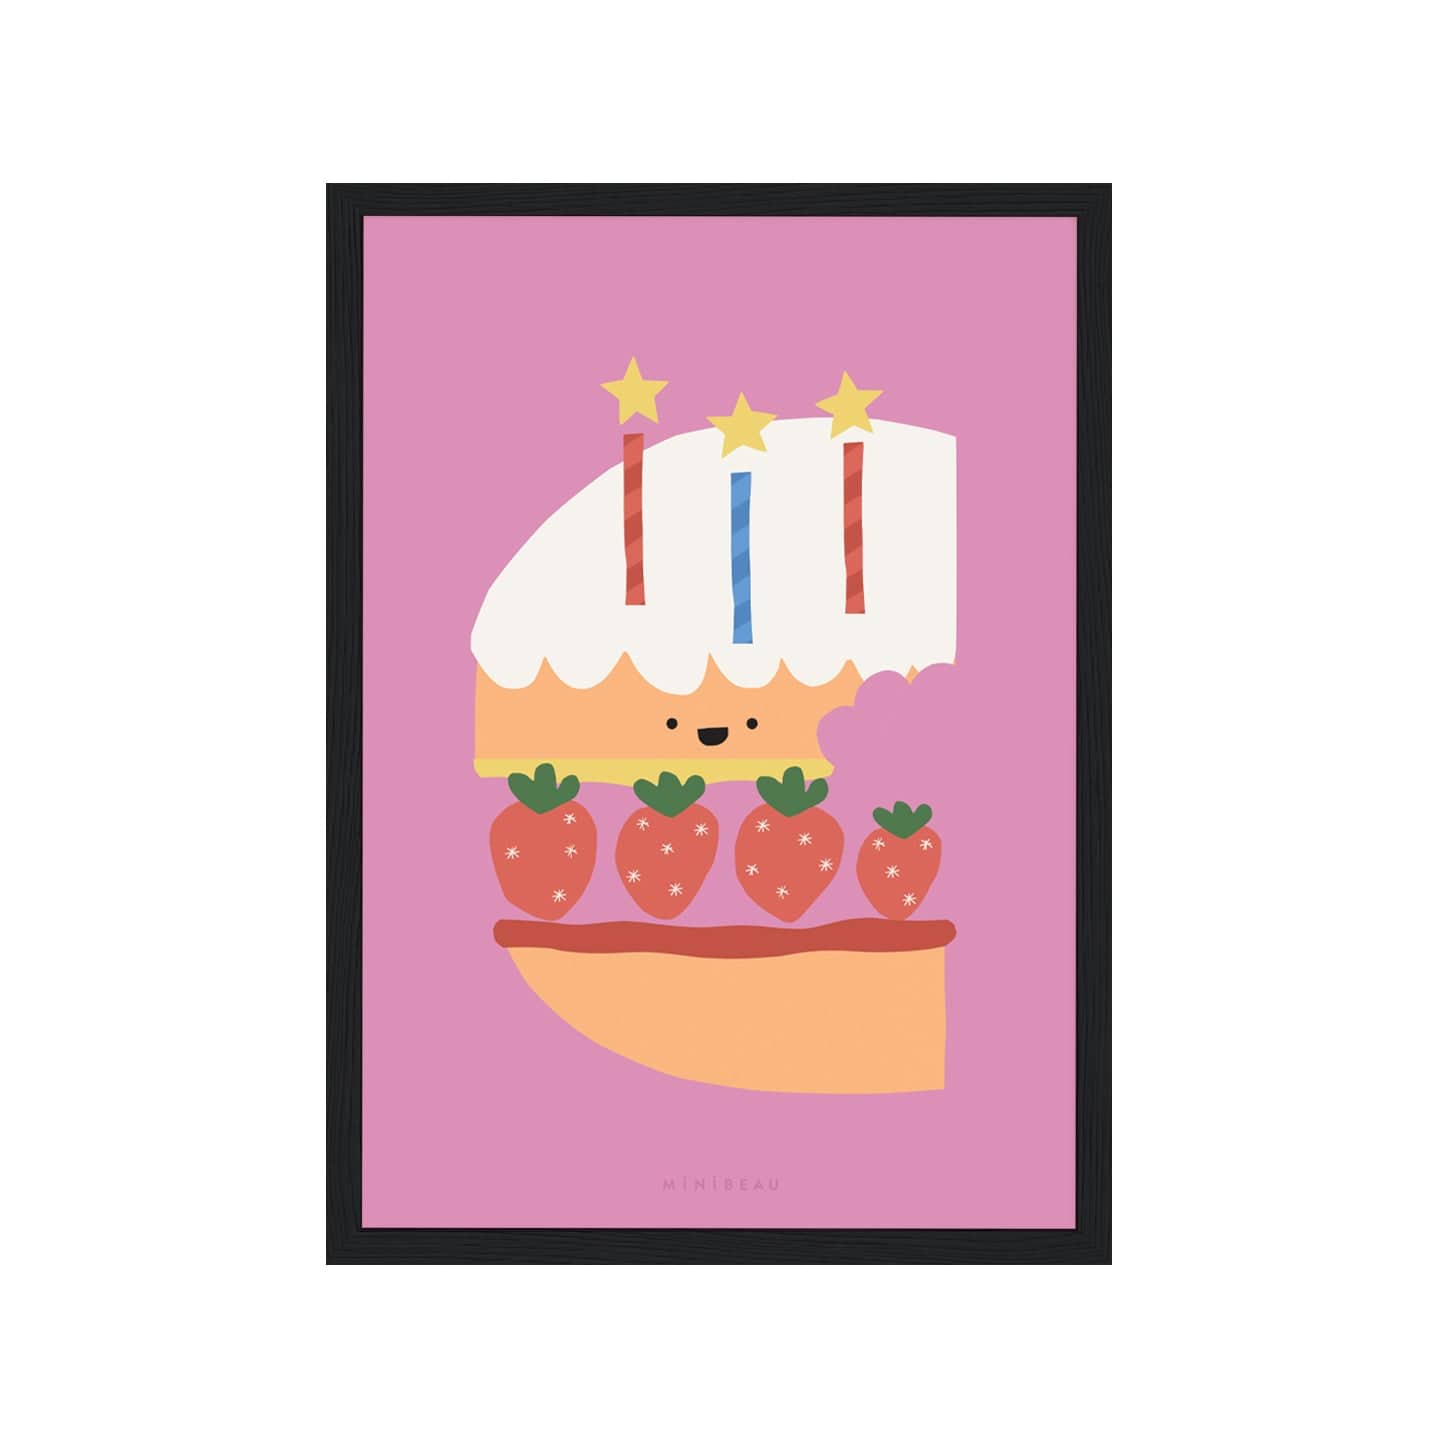 Art print in black frame. Our Happy Alphabet 'C' Art Print shows a layered cake in the shape of a C, with a layer of cake, then jam, then strawberries, then cream, then cake then white icing, with 3 candles, 2 red, 2 blue, with stars for flames, on a pink background.